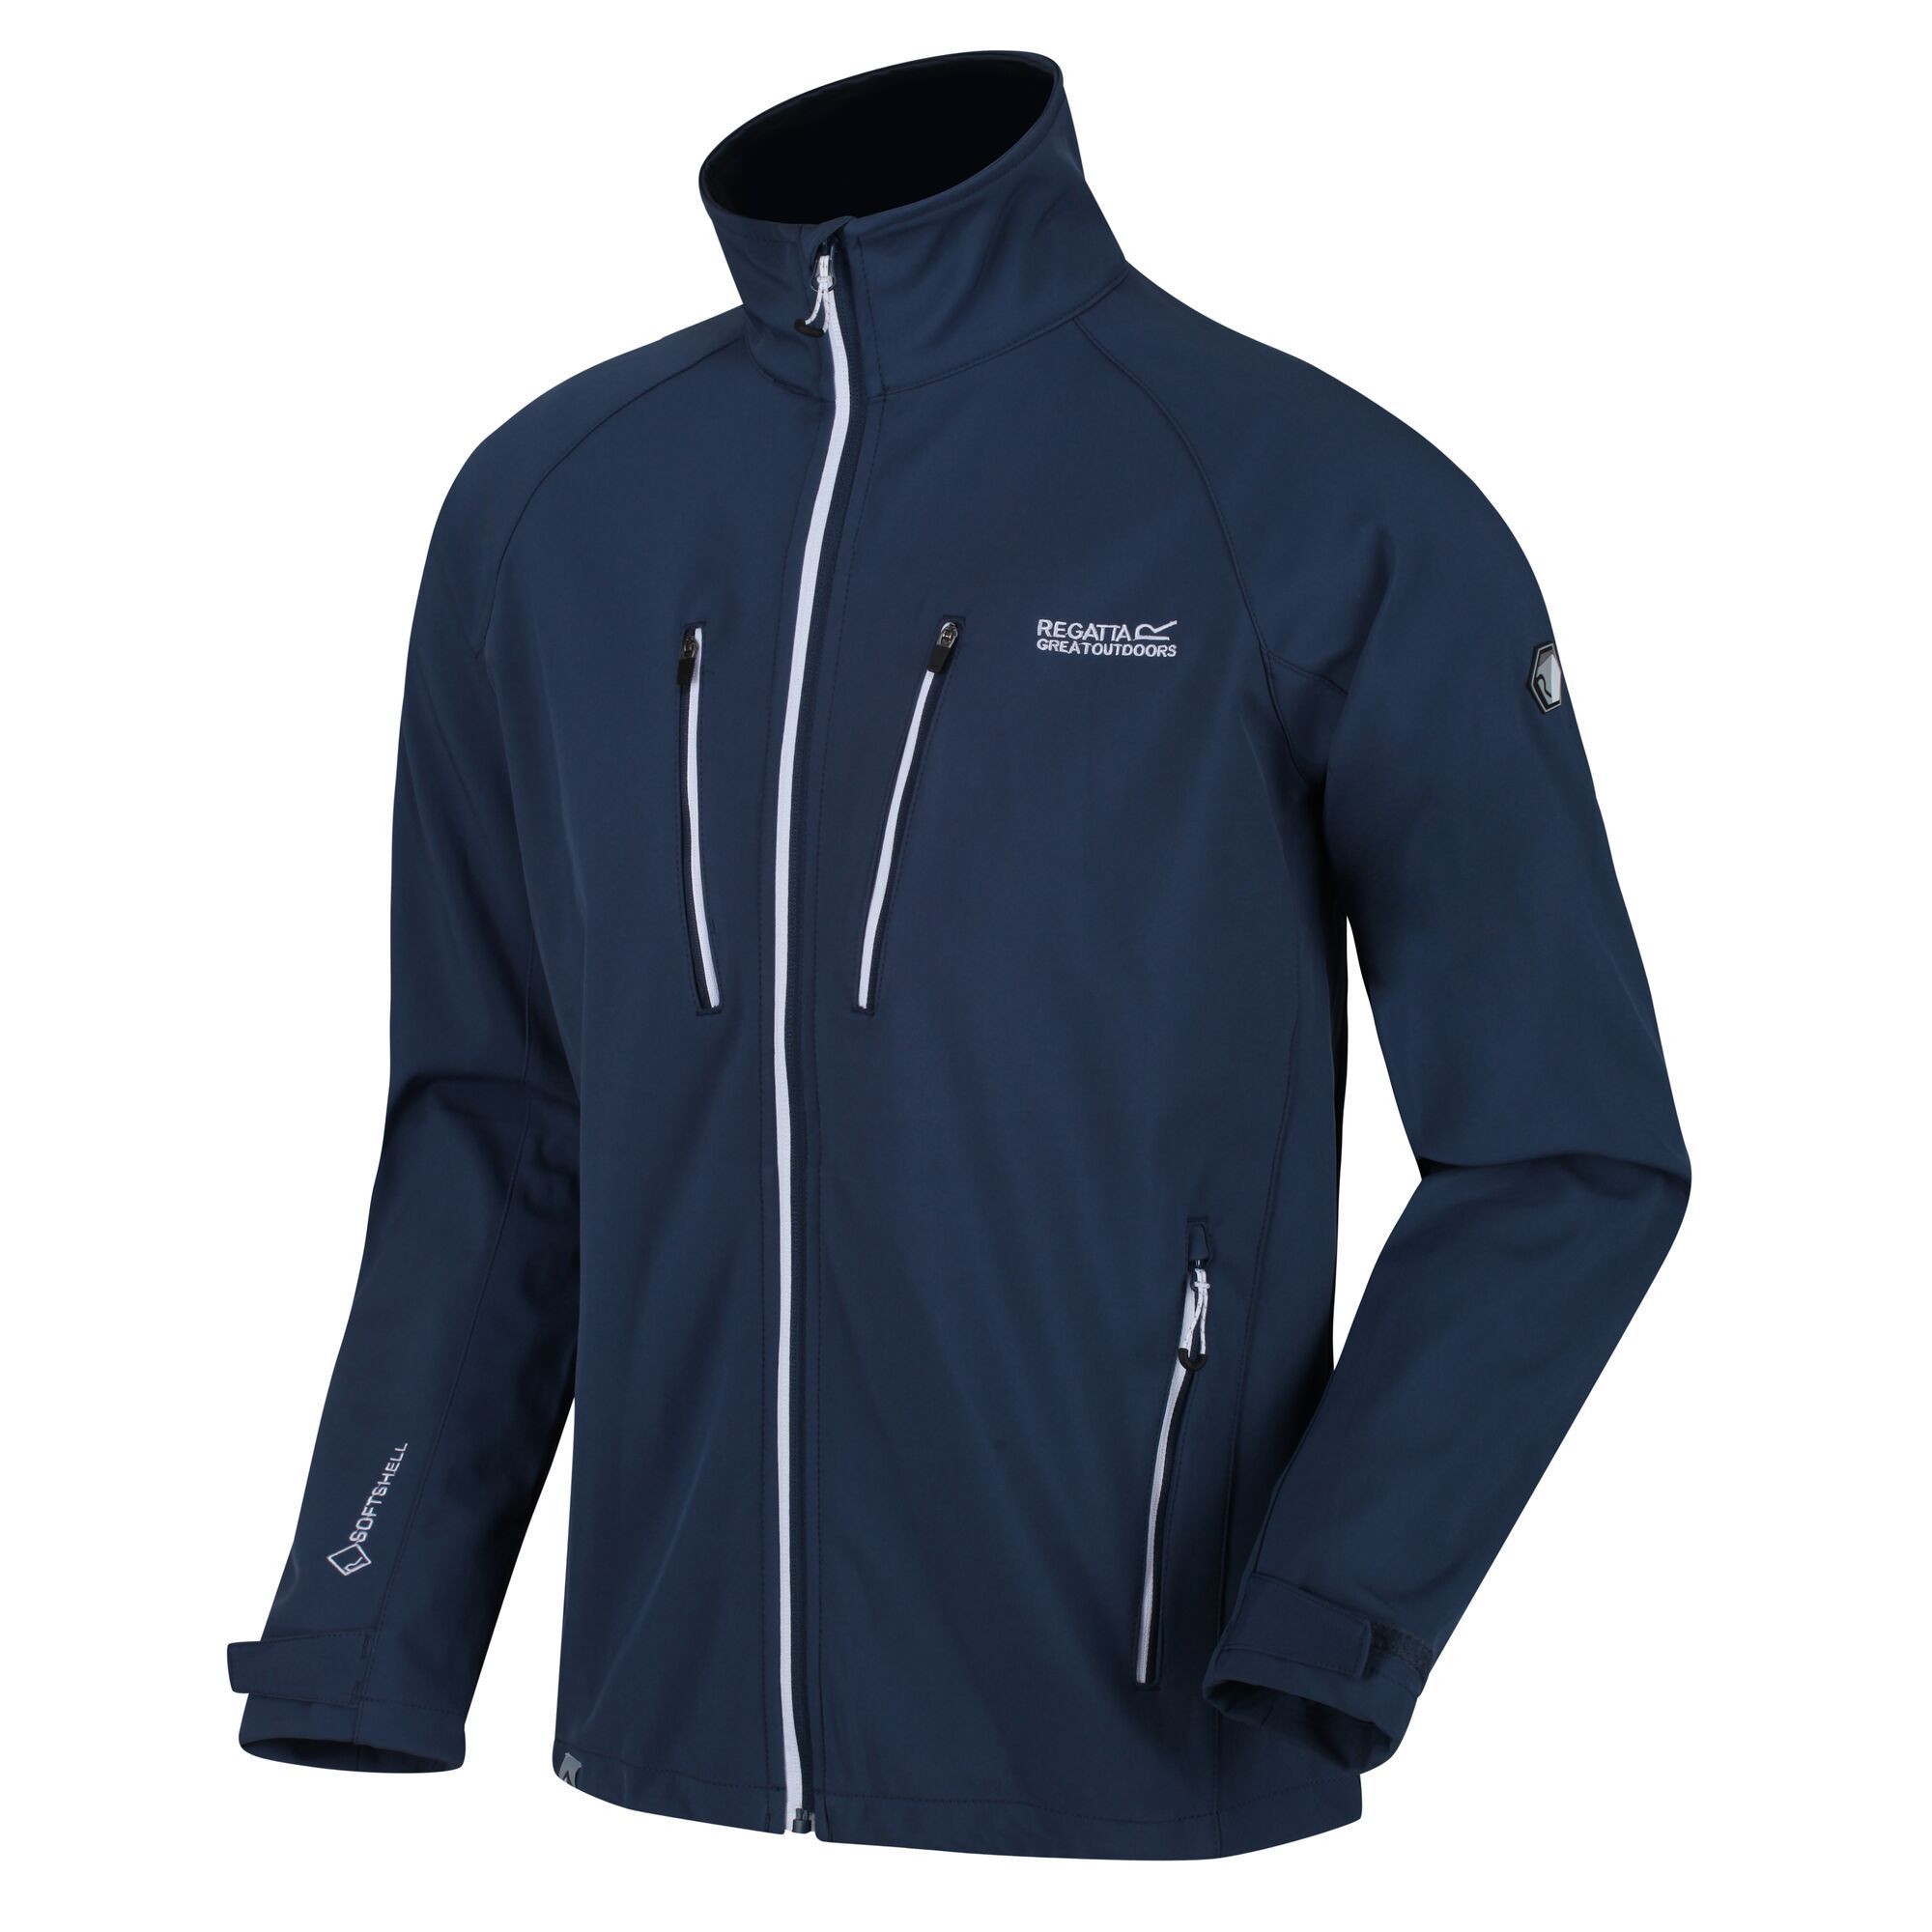 Elastane 4%, Polyester 96%. Lightweight jersey backed softshell fabric. Durable water repellent finish. Wind resistant. 2 zipped lower and 2 zipped chest pockets. Adjustable cuffs.